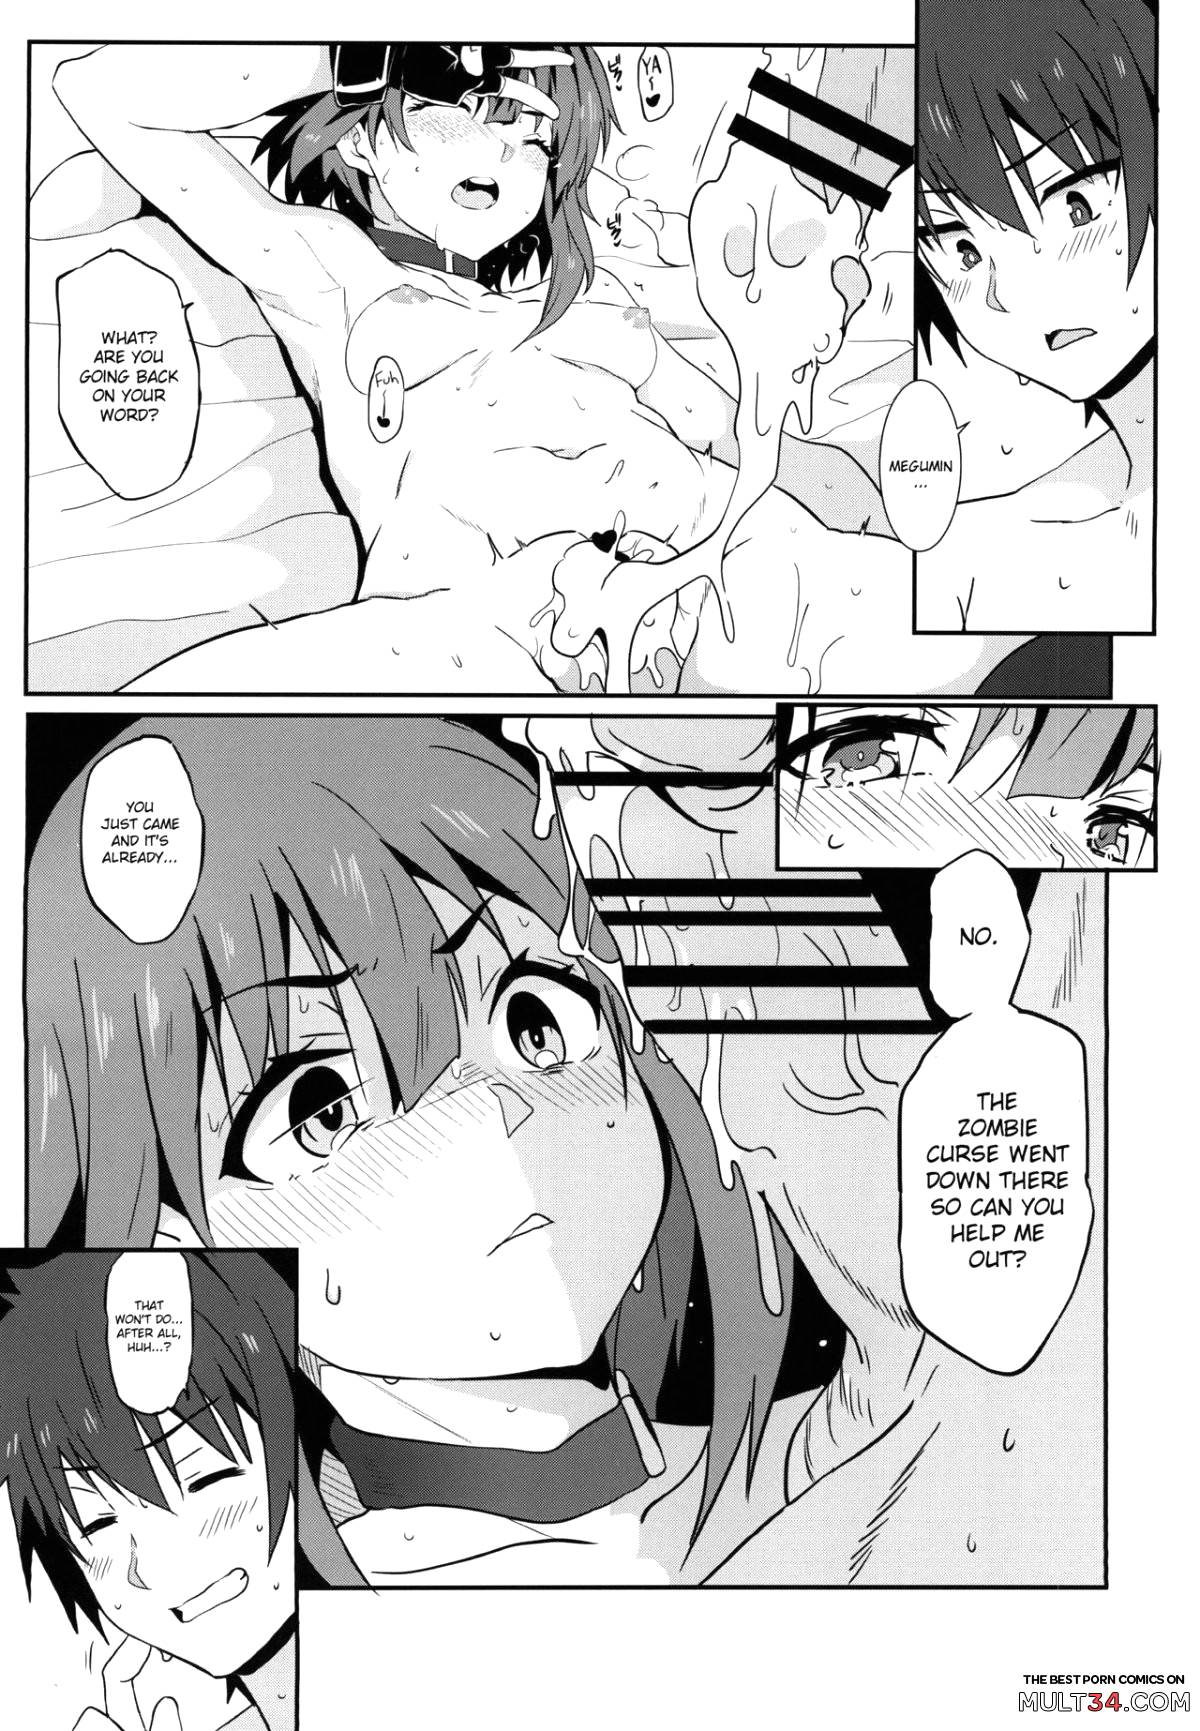 Blessing Megumin with a Magnificence Explosion! 4 page 16